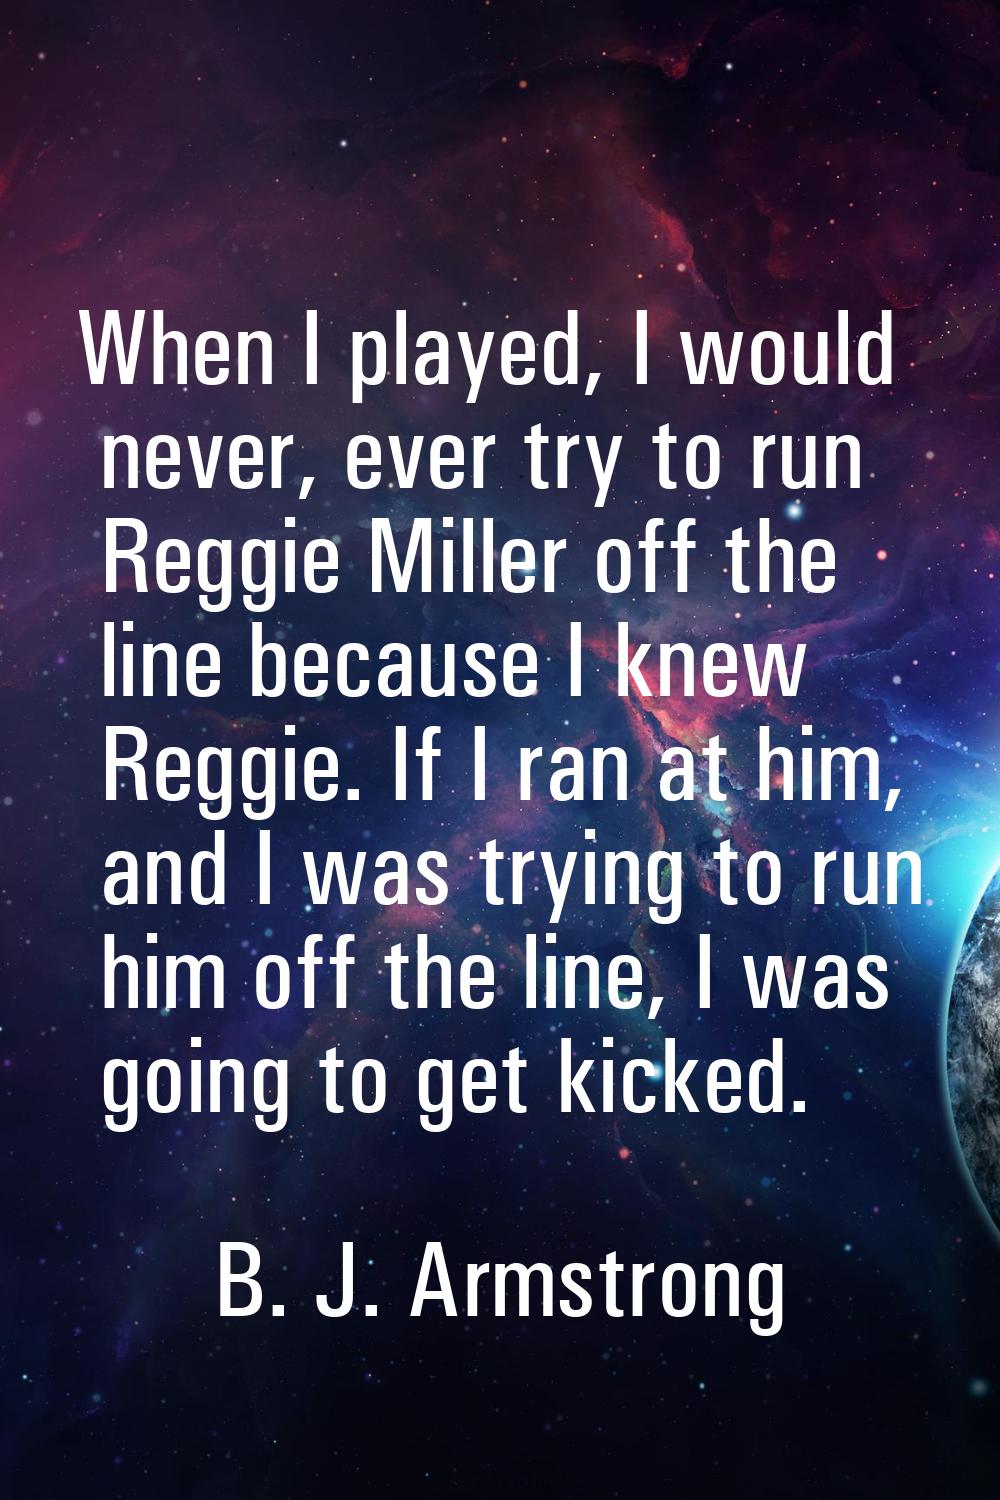 When I played, I would never, ever try to run Reggie Miller off the line because I knew Reggie. If 